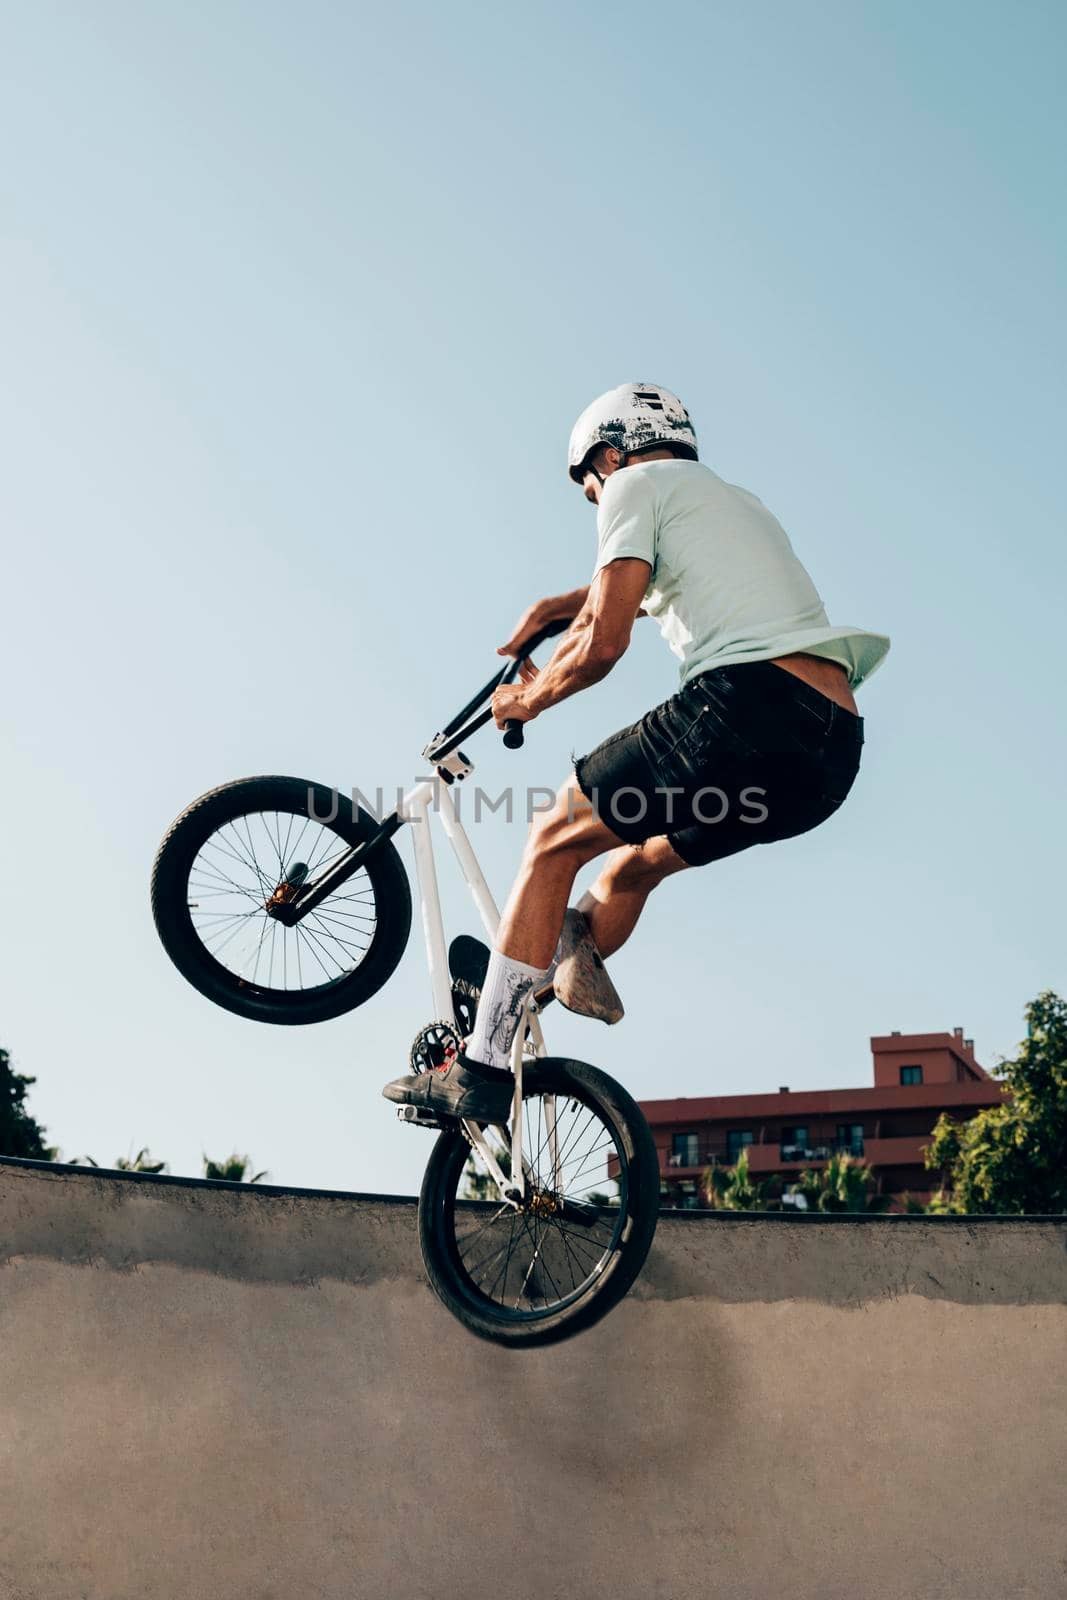 young man extreme jumping with bicycle. High quality photo by Zahard